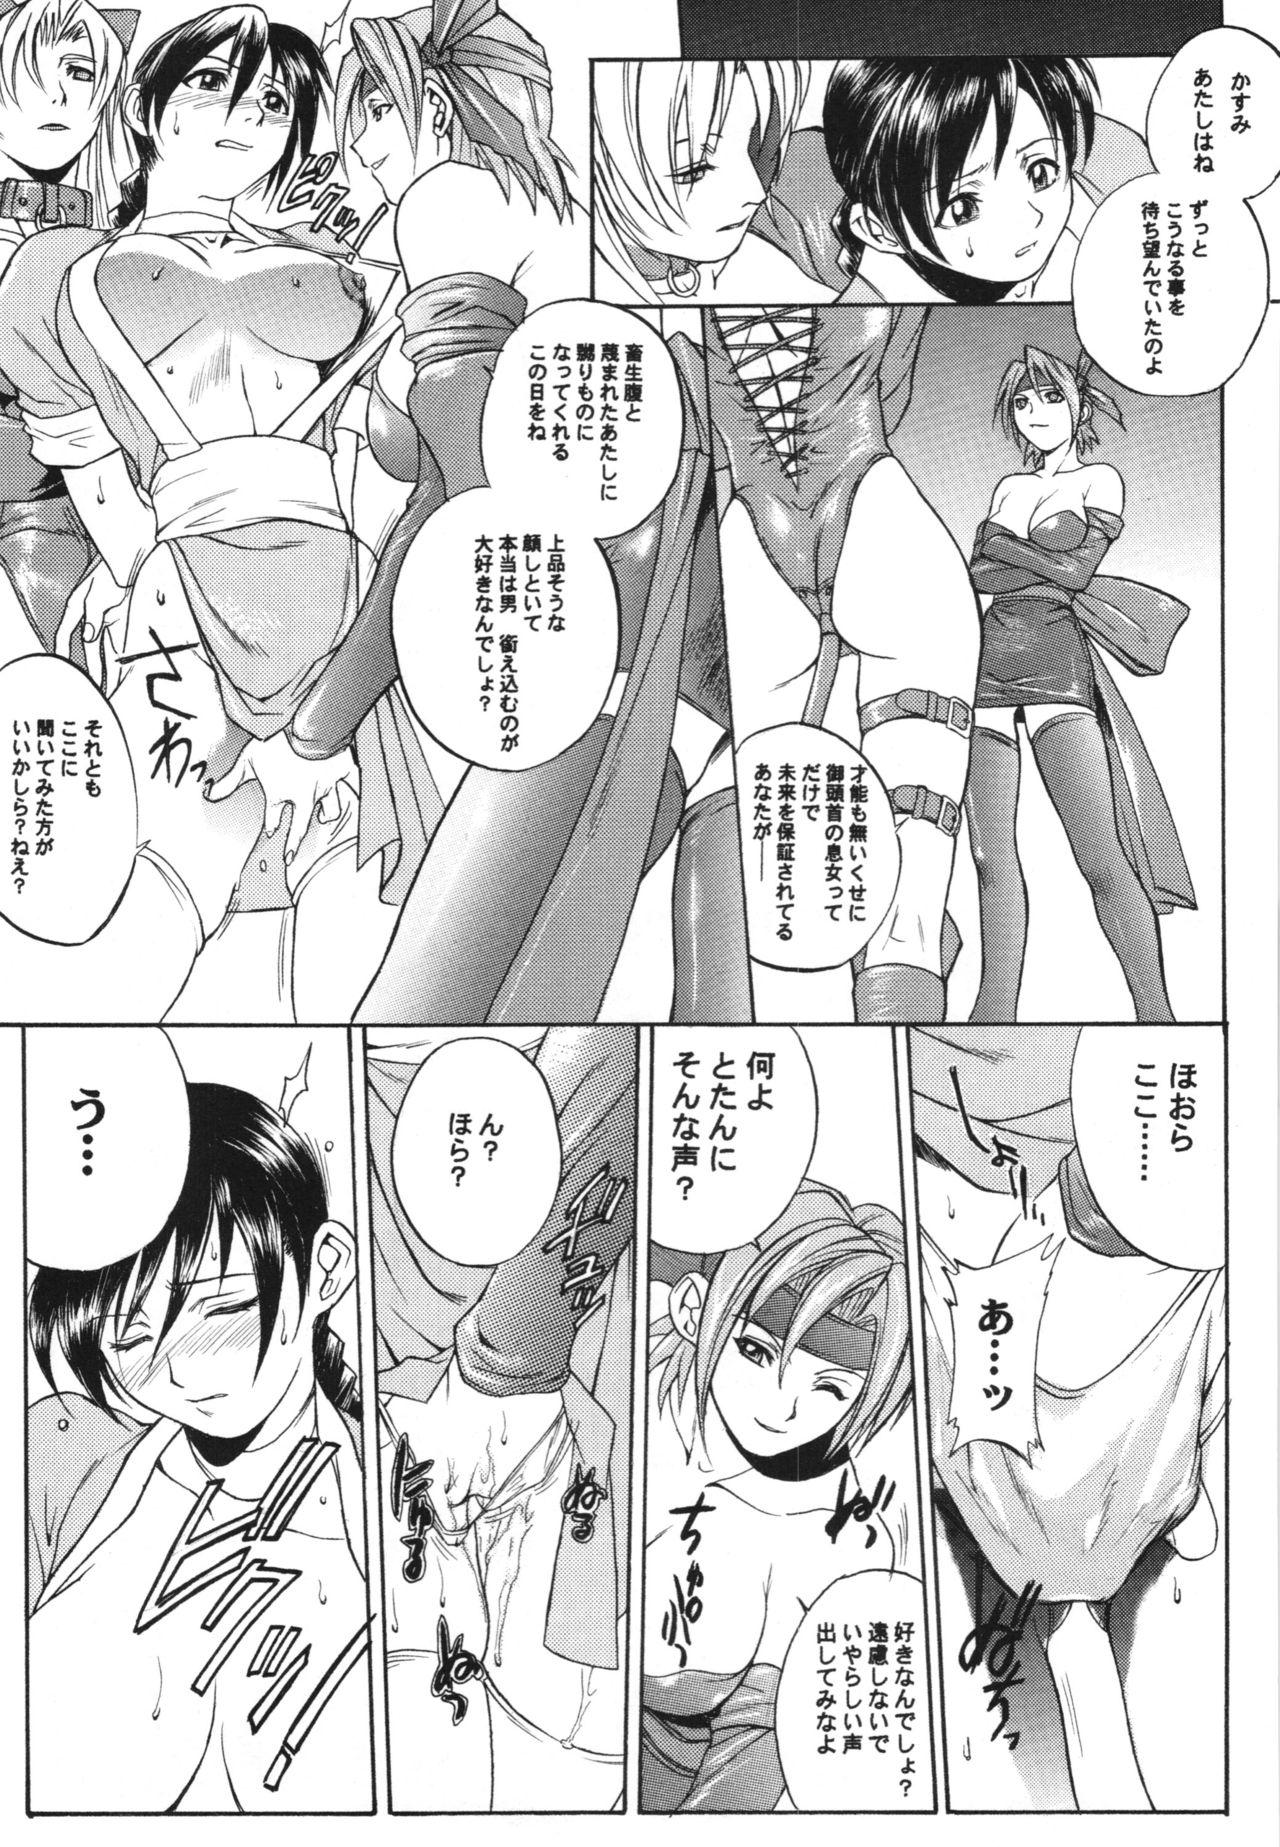 Couples WAY OF TEX-MEX Soushuuhen 3 + Omakebon - Dead or alive To heart Xenosaga Glamour - Page 11